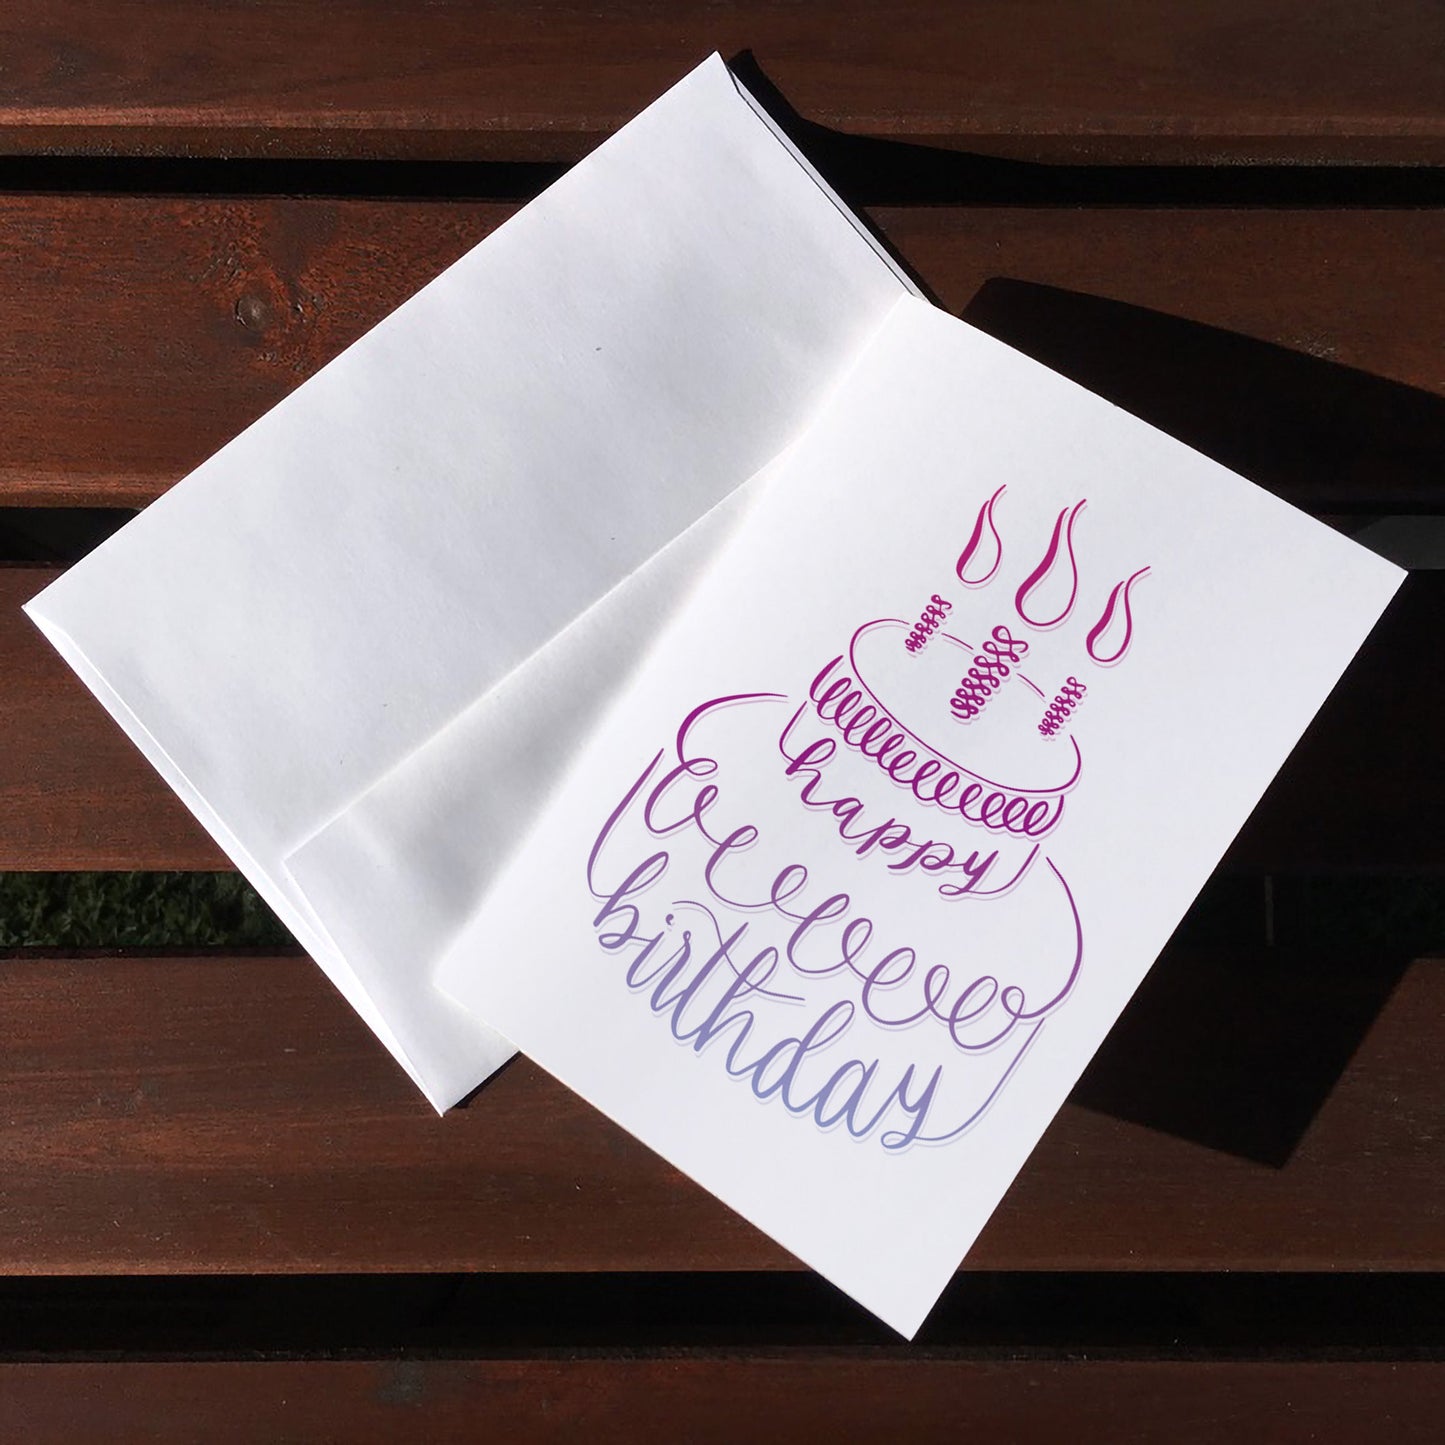 A top view of the greeting card: "Happy birthday"